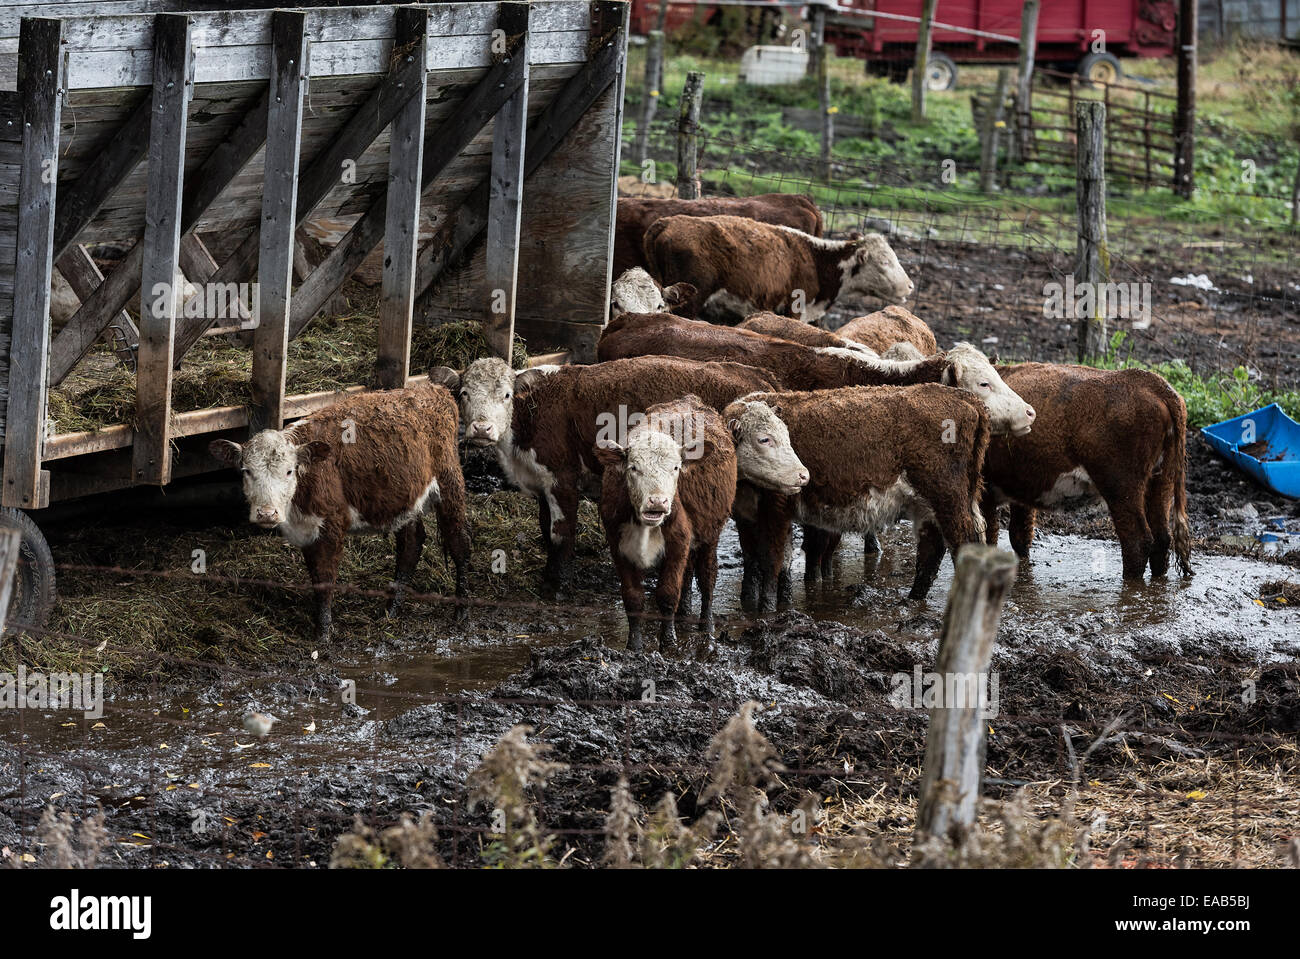 Cattle herd at feed station, New York, USA Stock Photo